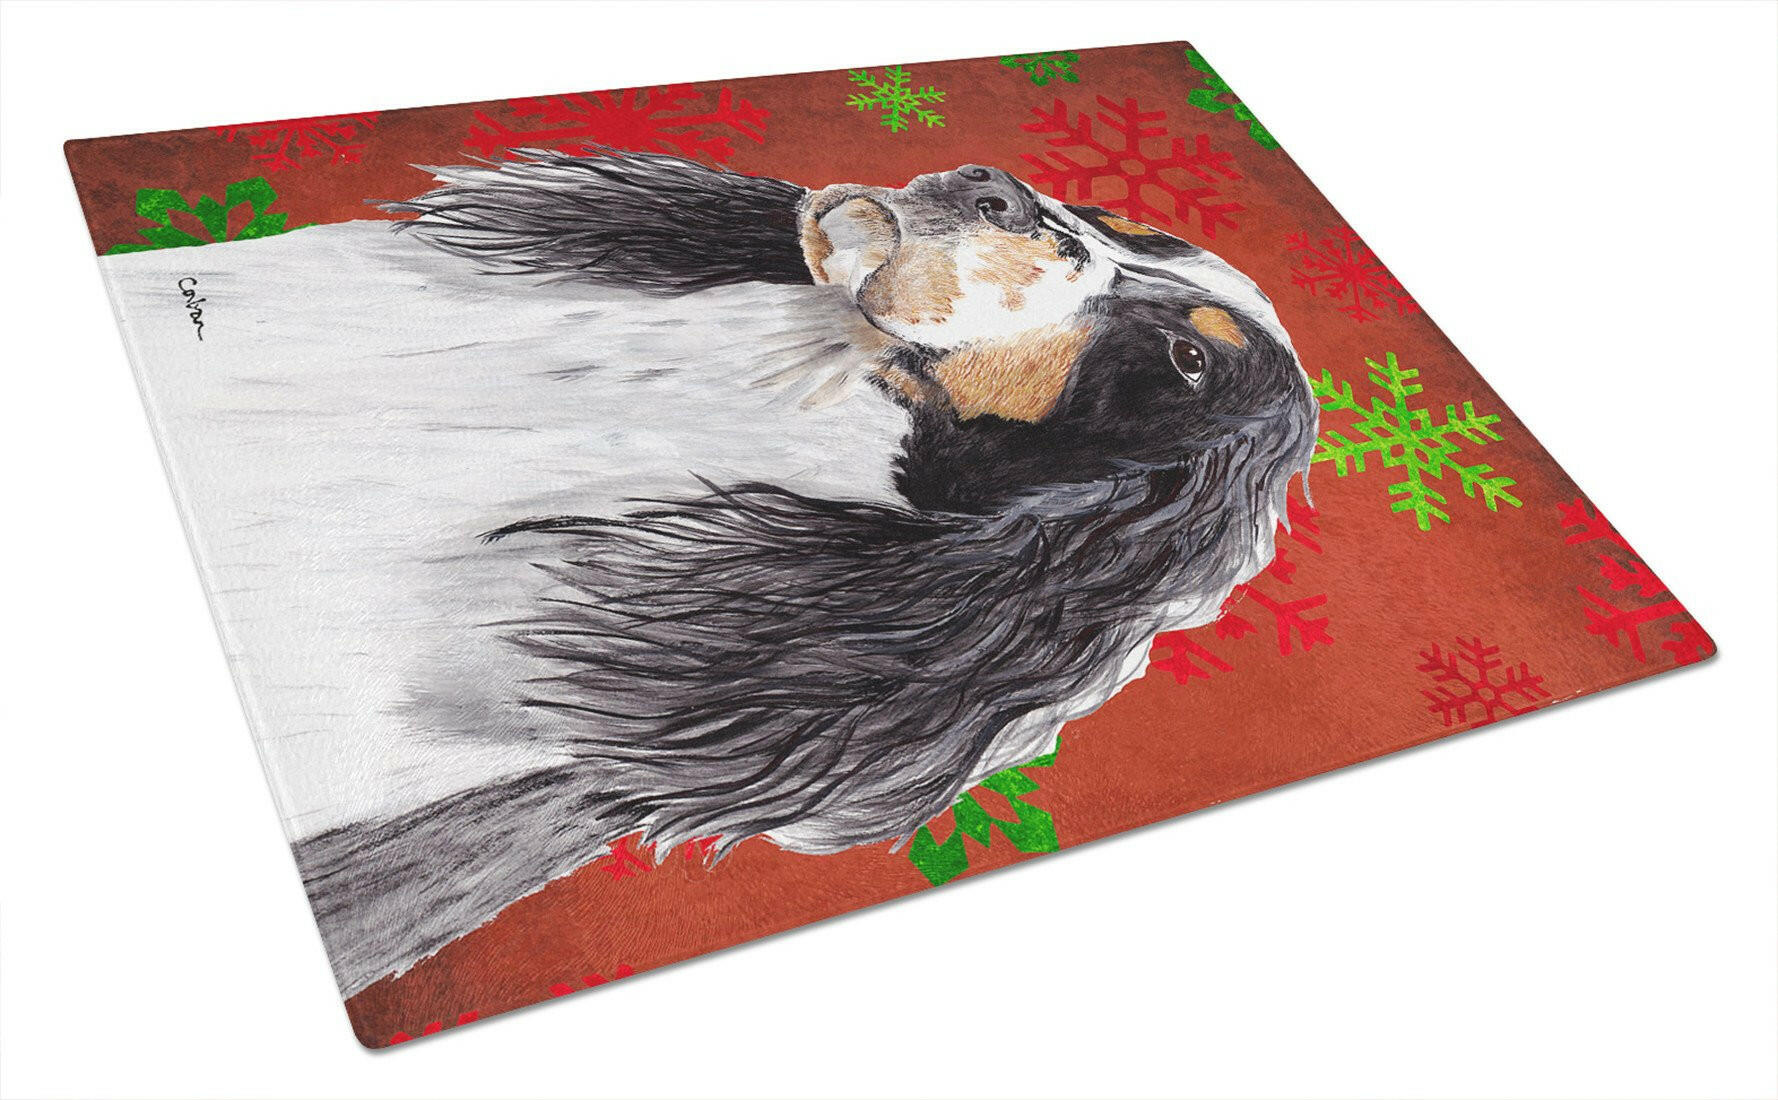 Springer Spaniel Red and Green Snowflakes Christmas Glass Cutting Board Large by Caroline's Treasures